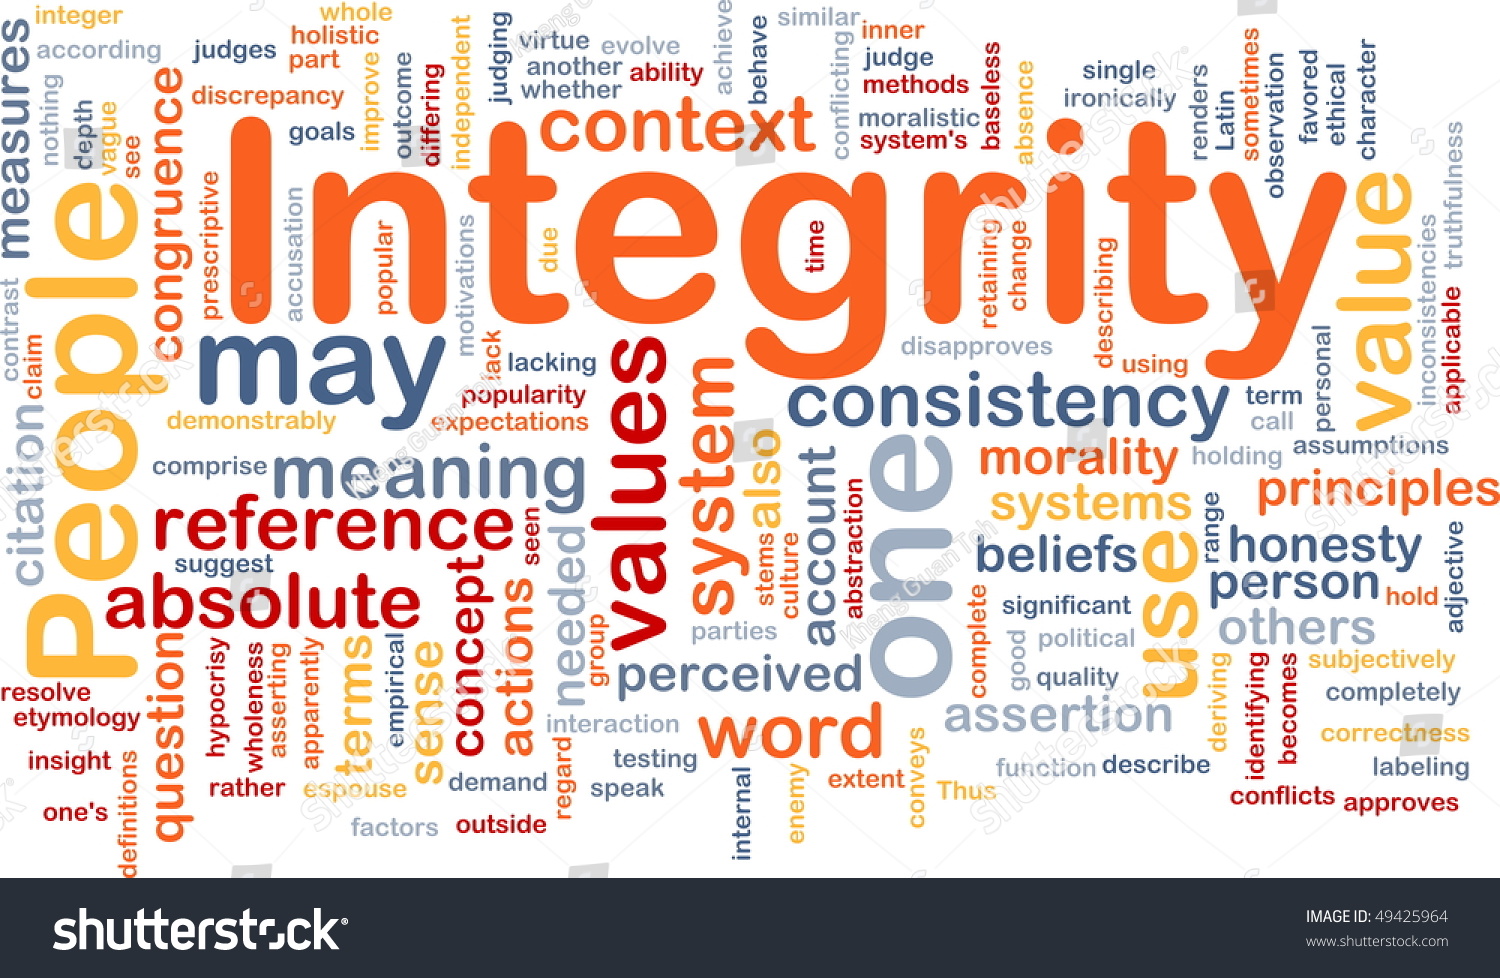 Integrity systems. Business Integrity. Meaning картинка. Values illustration. Integrity principle.